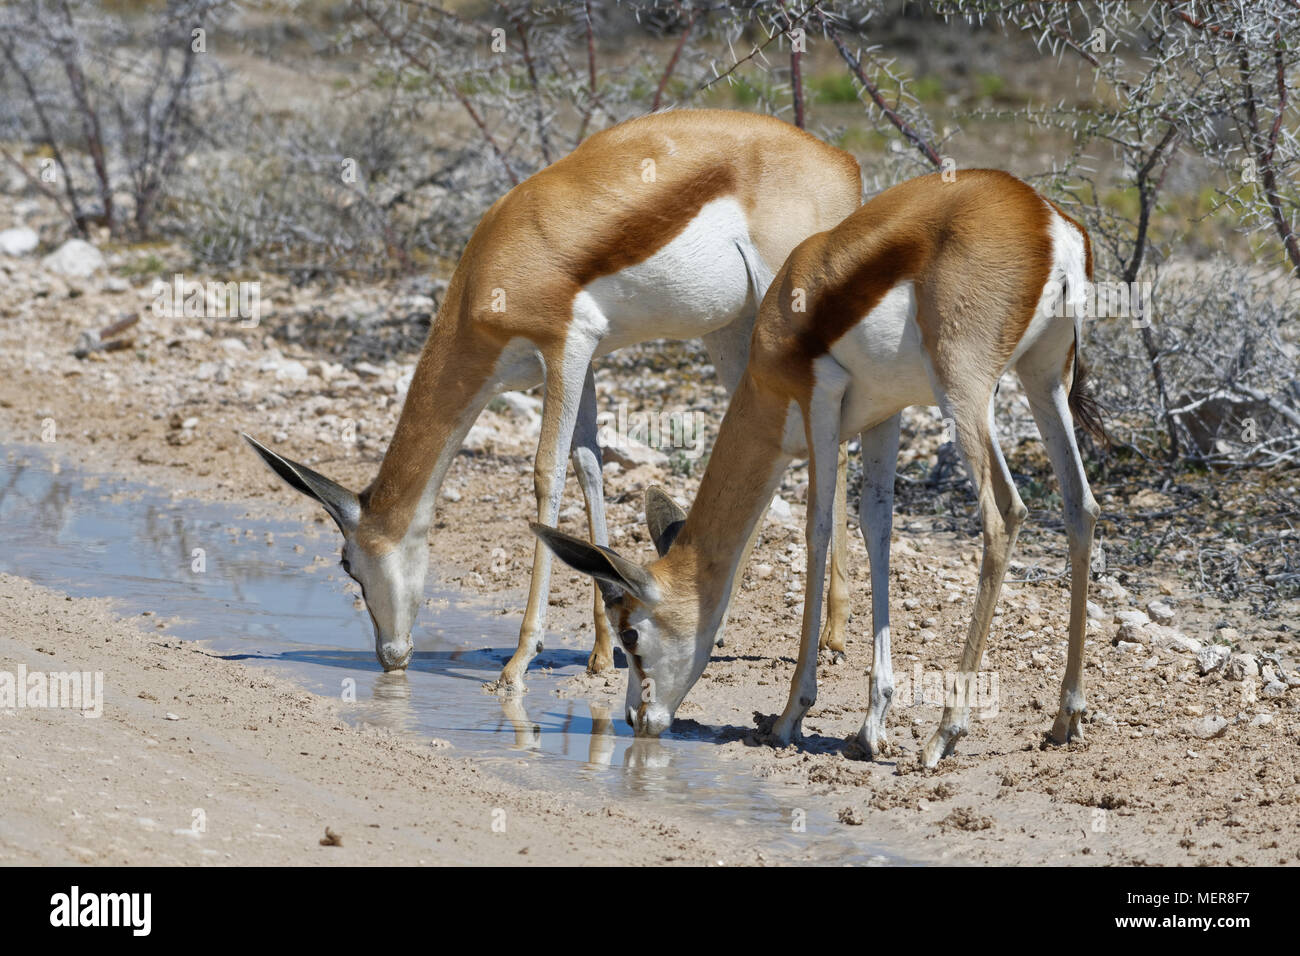 Two springboks (Antidorcas marsupialis), adults male and female on a dirt road, drinking rainwater from a puddle, Etosha National Park, Namibia,Africa Stock Photo